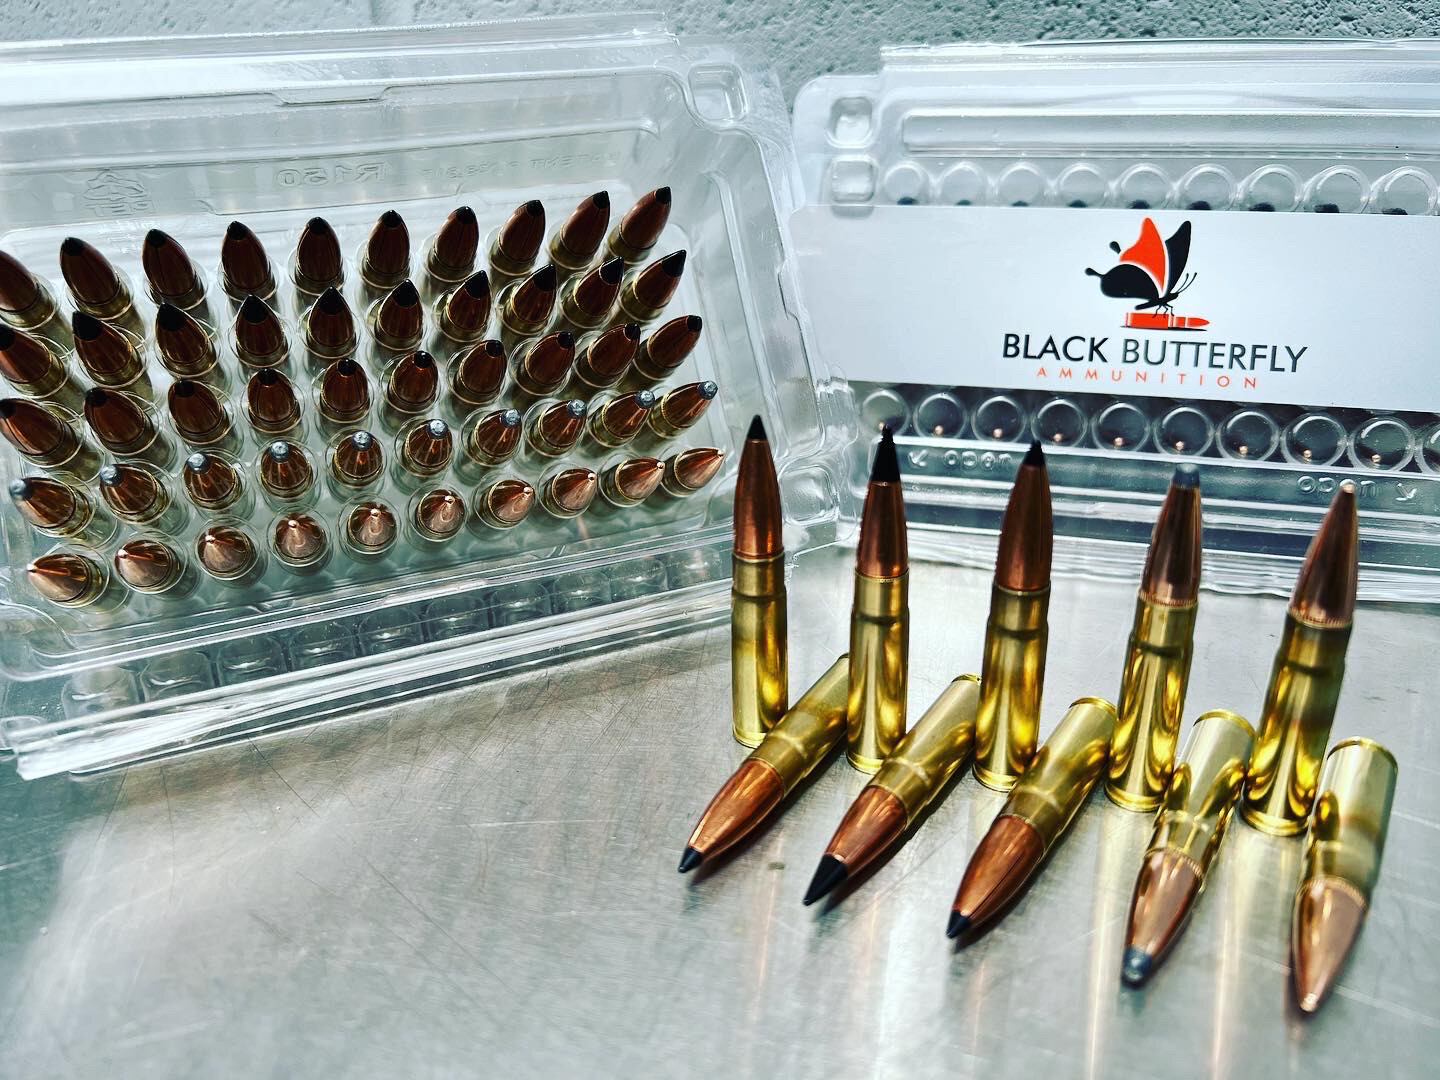 Black Butterfly Ammunition Premium, .300 AAC Blackout, 50 Rounds, SUPER SAMPLER, TAC-PAC, 1:7 Twist or Faster